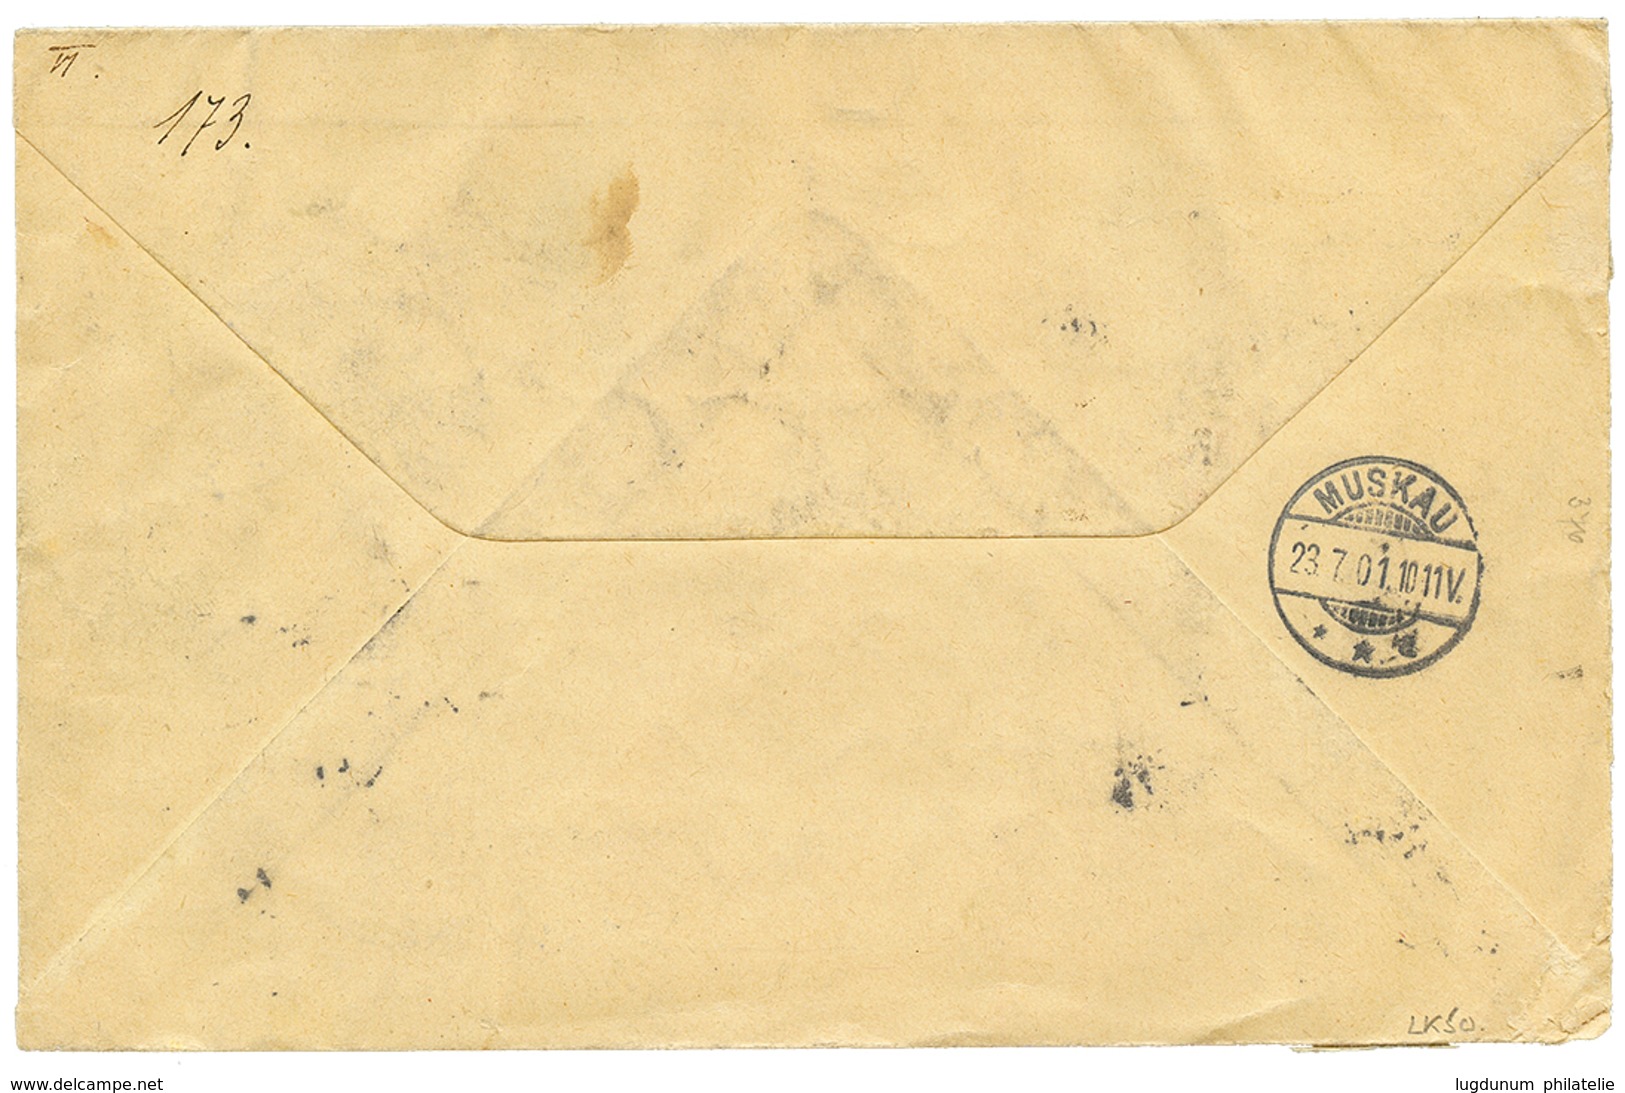 574 "PETCHILI" : 1901 GERMANY 2pf(x21) Canc. KD.FELDPOSTSTATION N°7 On REGISTERED Envelope To GERMANY. RARE. Superb. - Cina (uffici)